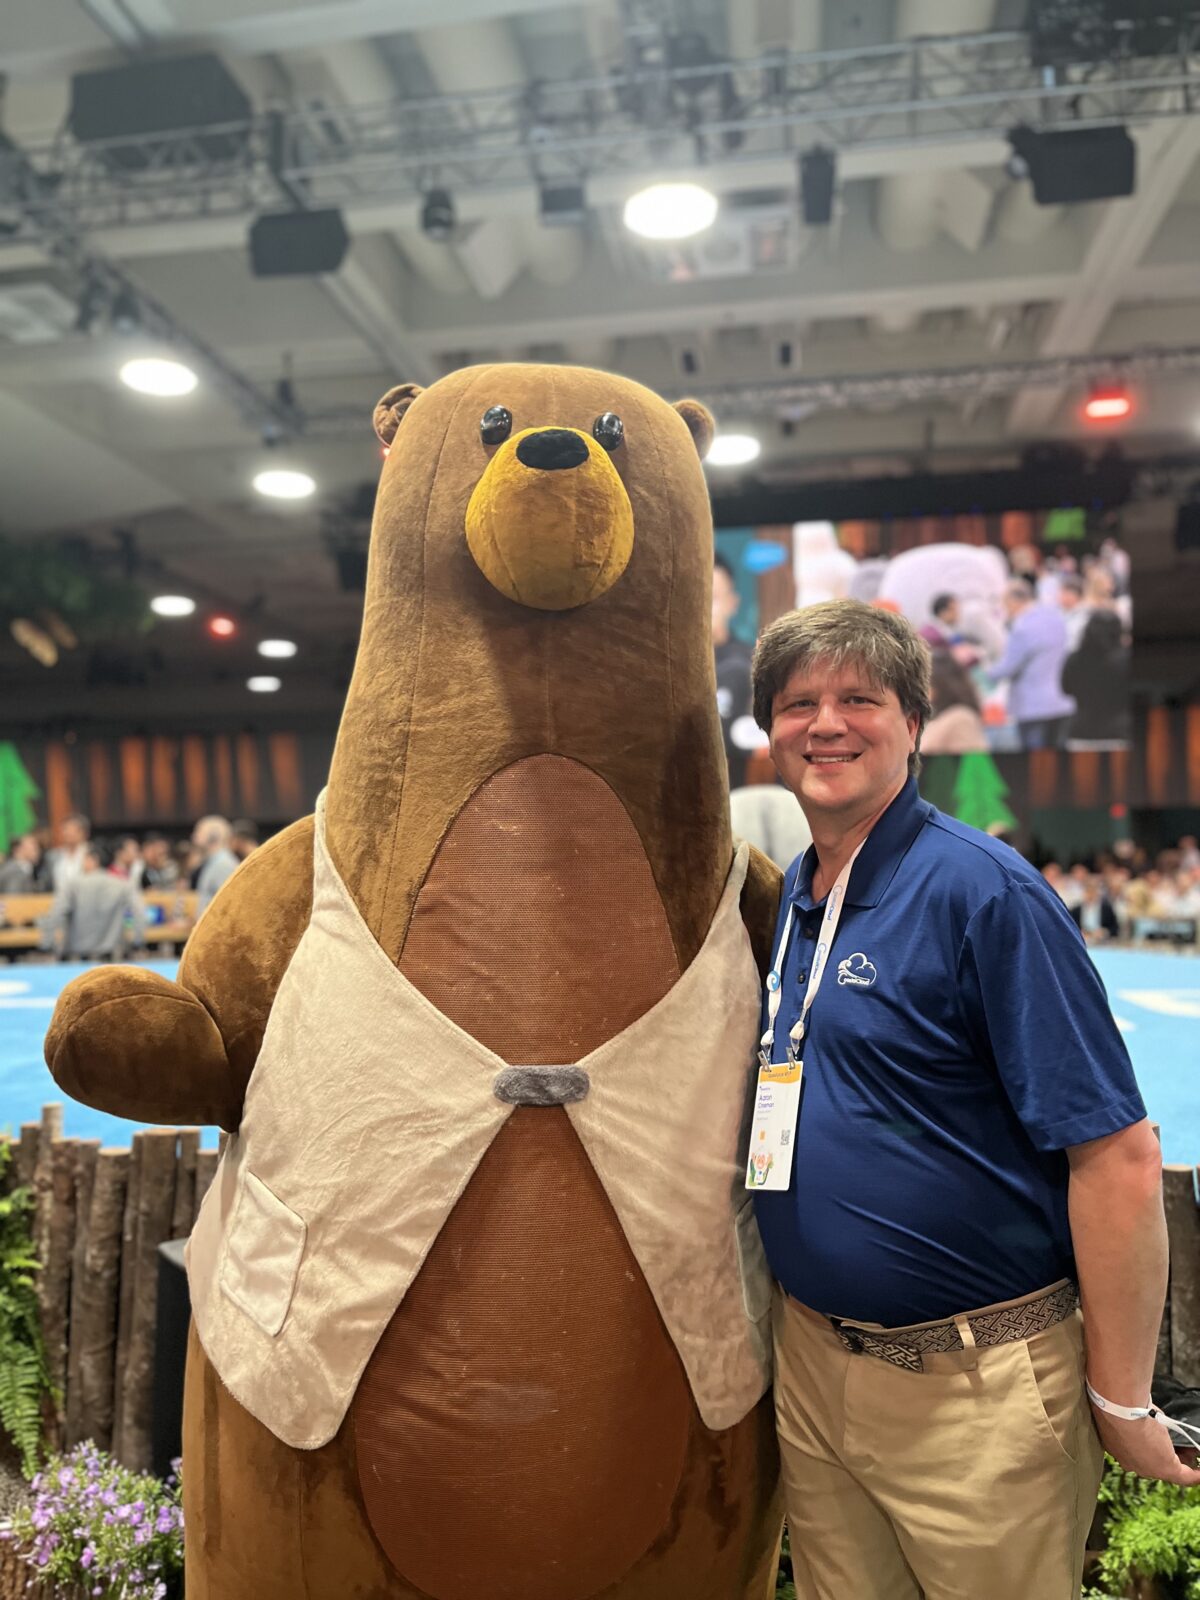 A picture of myself standing the Kody, the Salesforce developer mascot